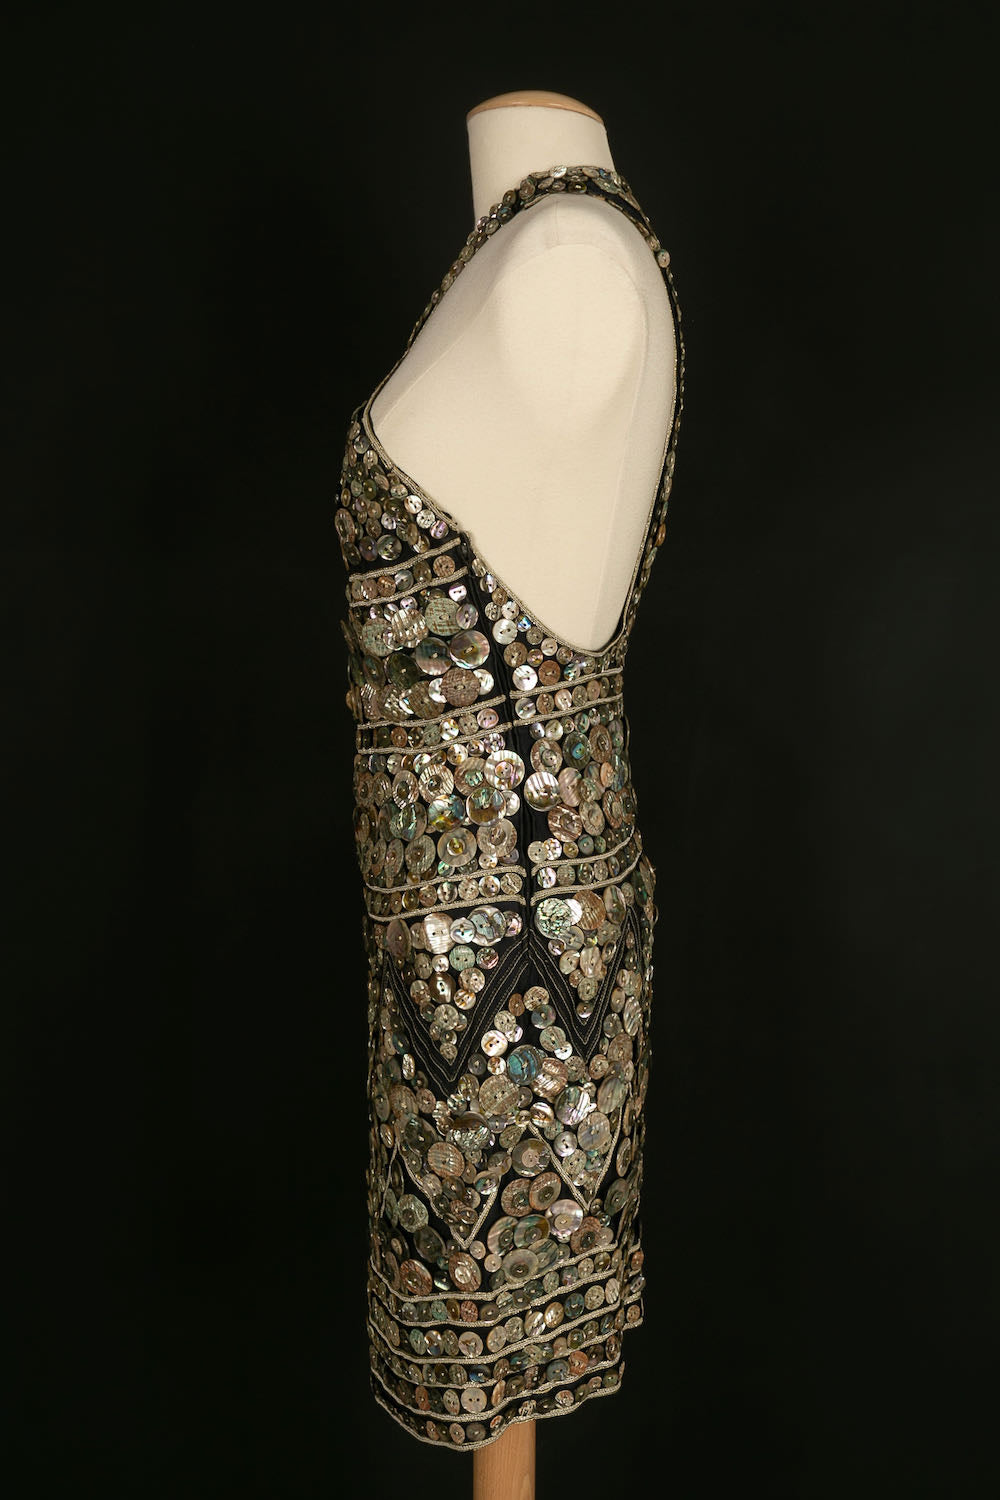 Robe "Universal" Louis Féraud Haute Couture 